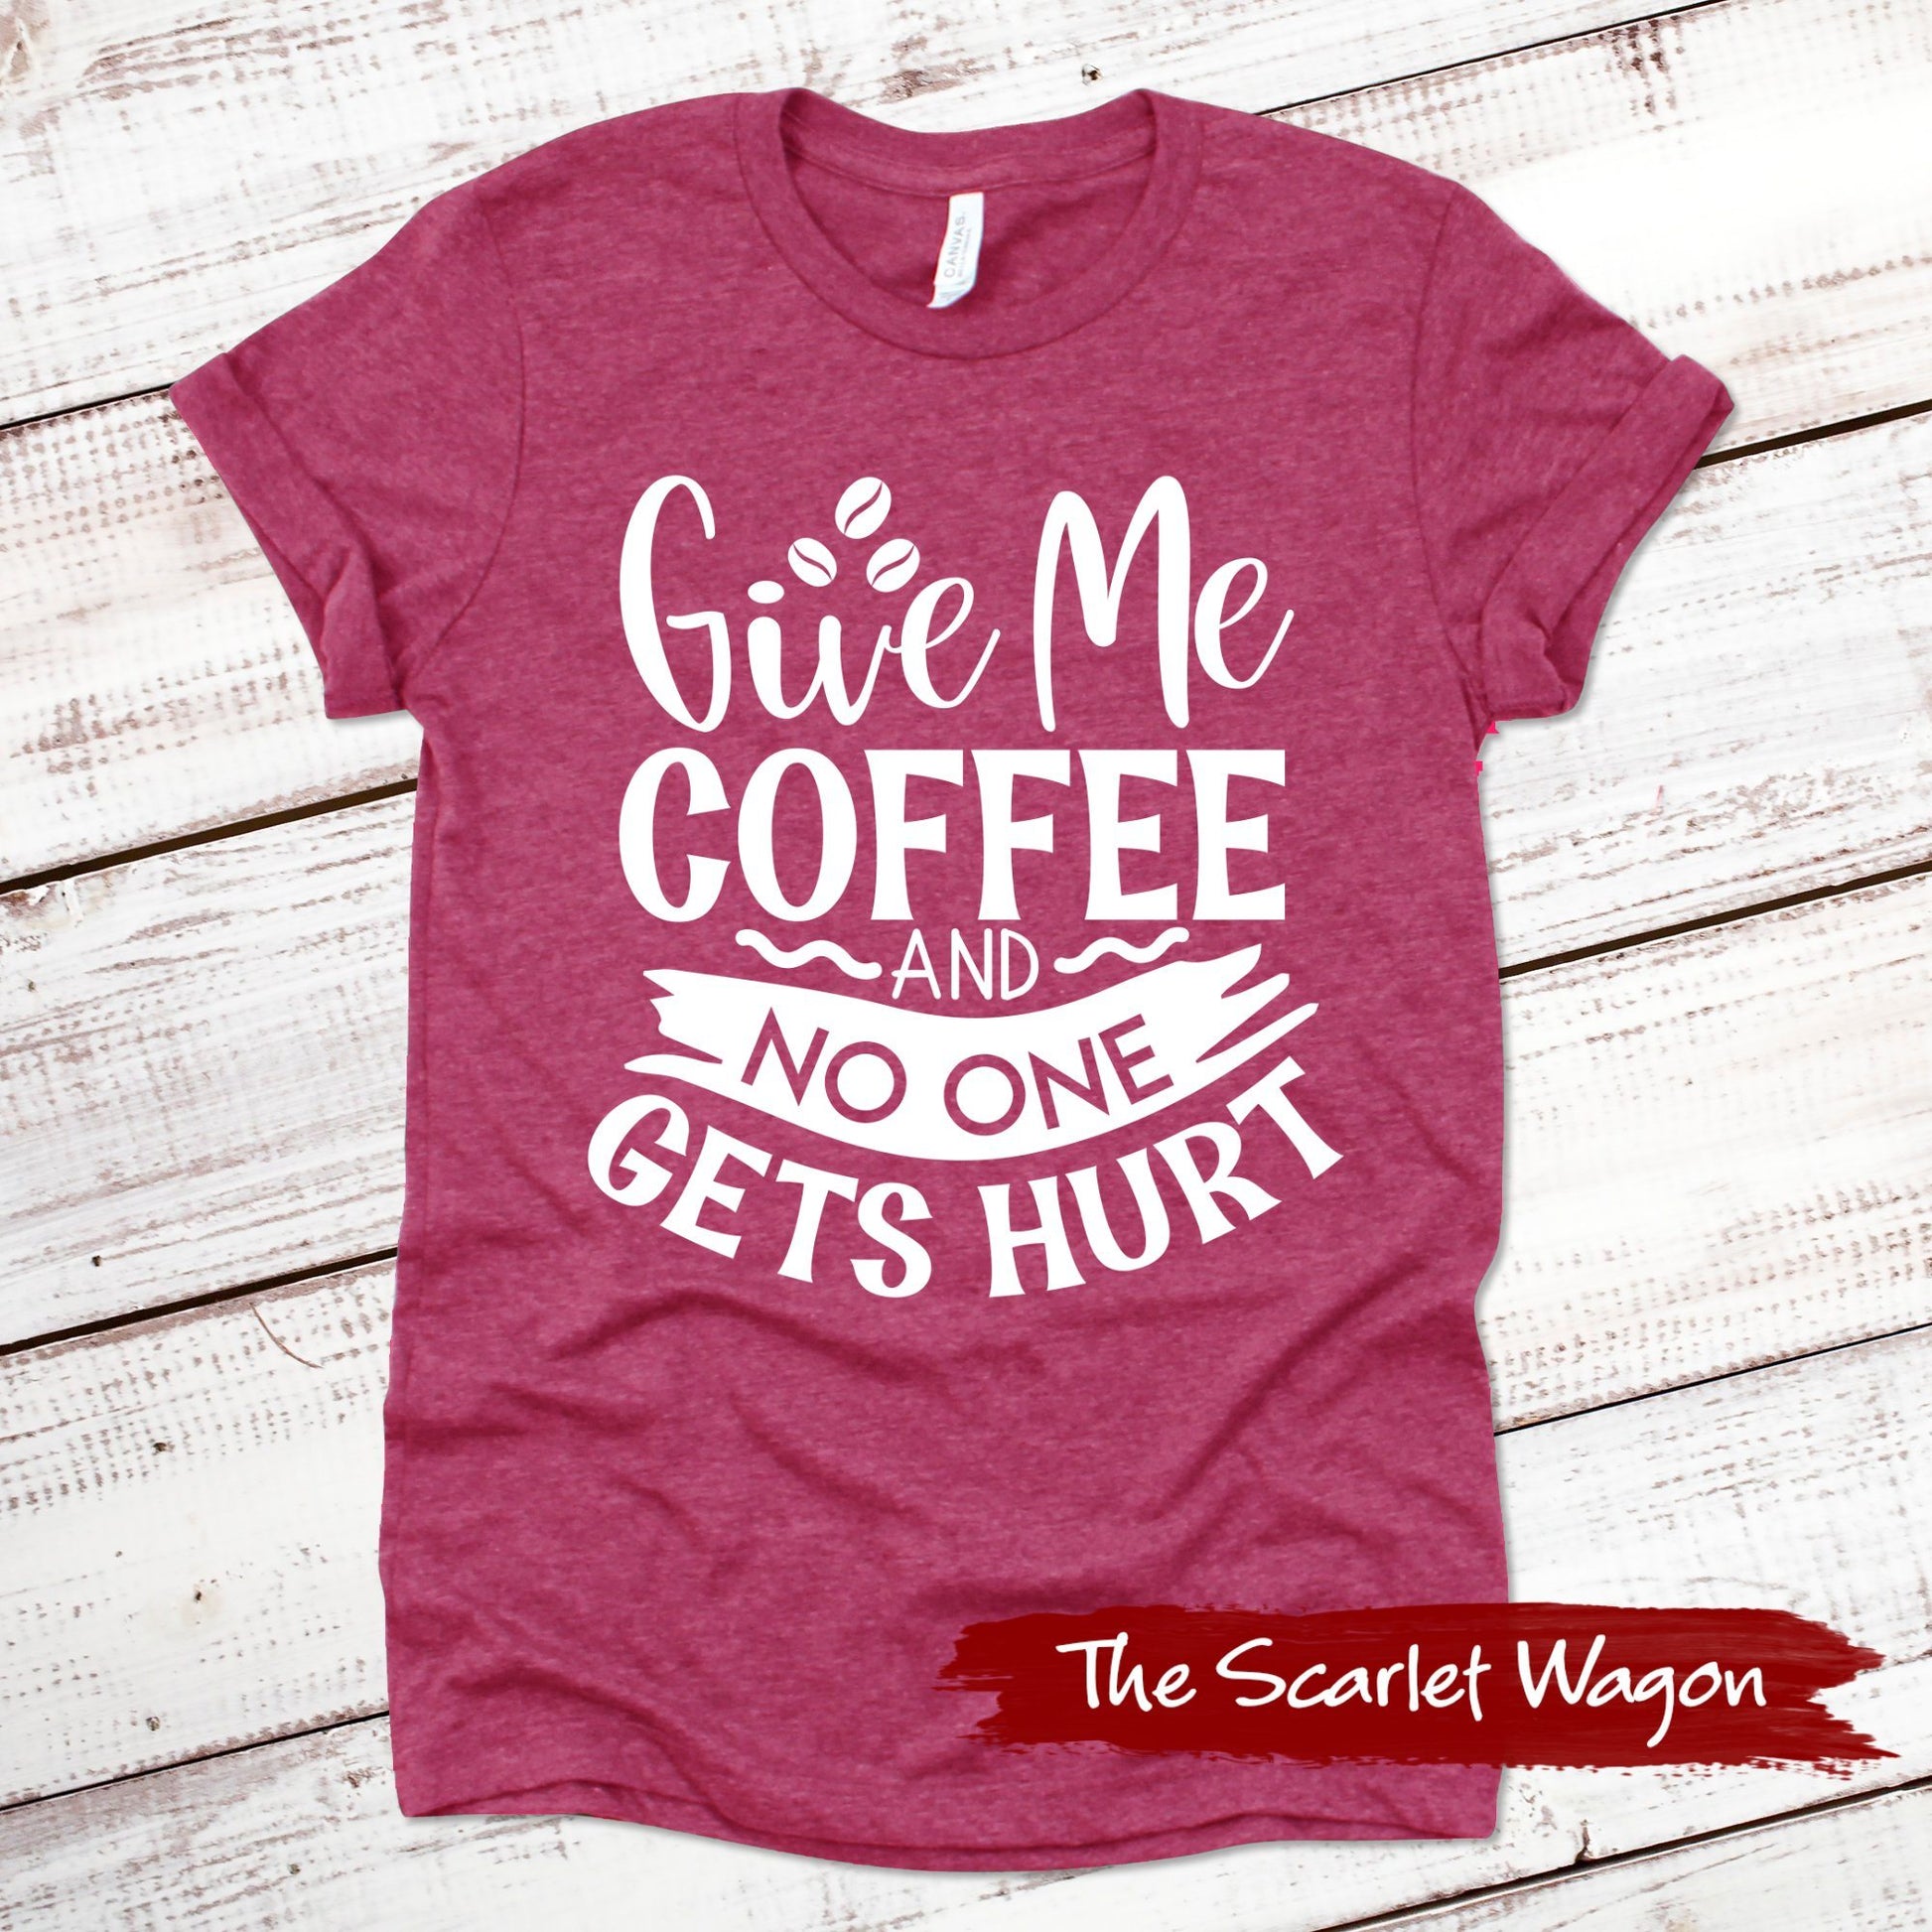 Give Me Coffee and No One Gets Hurt Funny Shirt Scarlet Wagon Heather Raspberry XS 